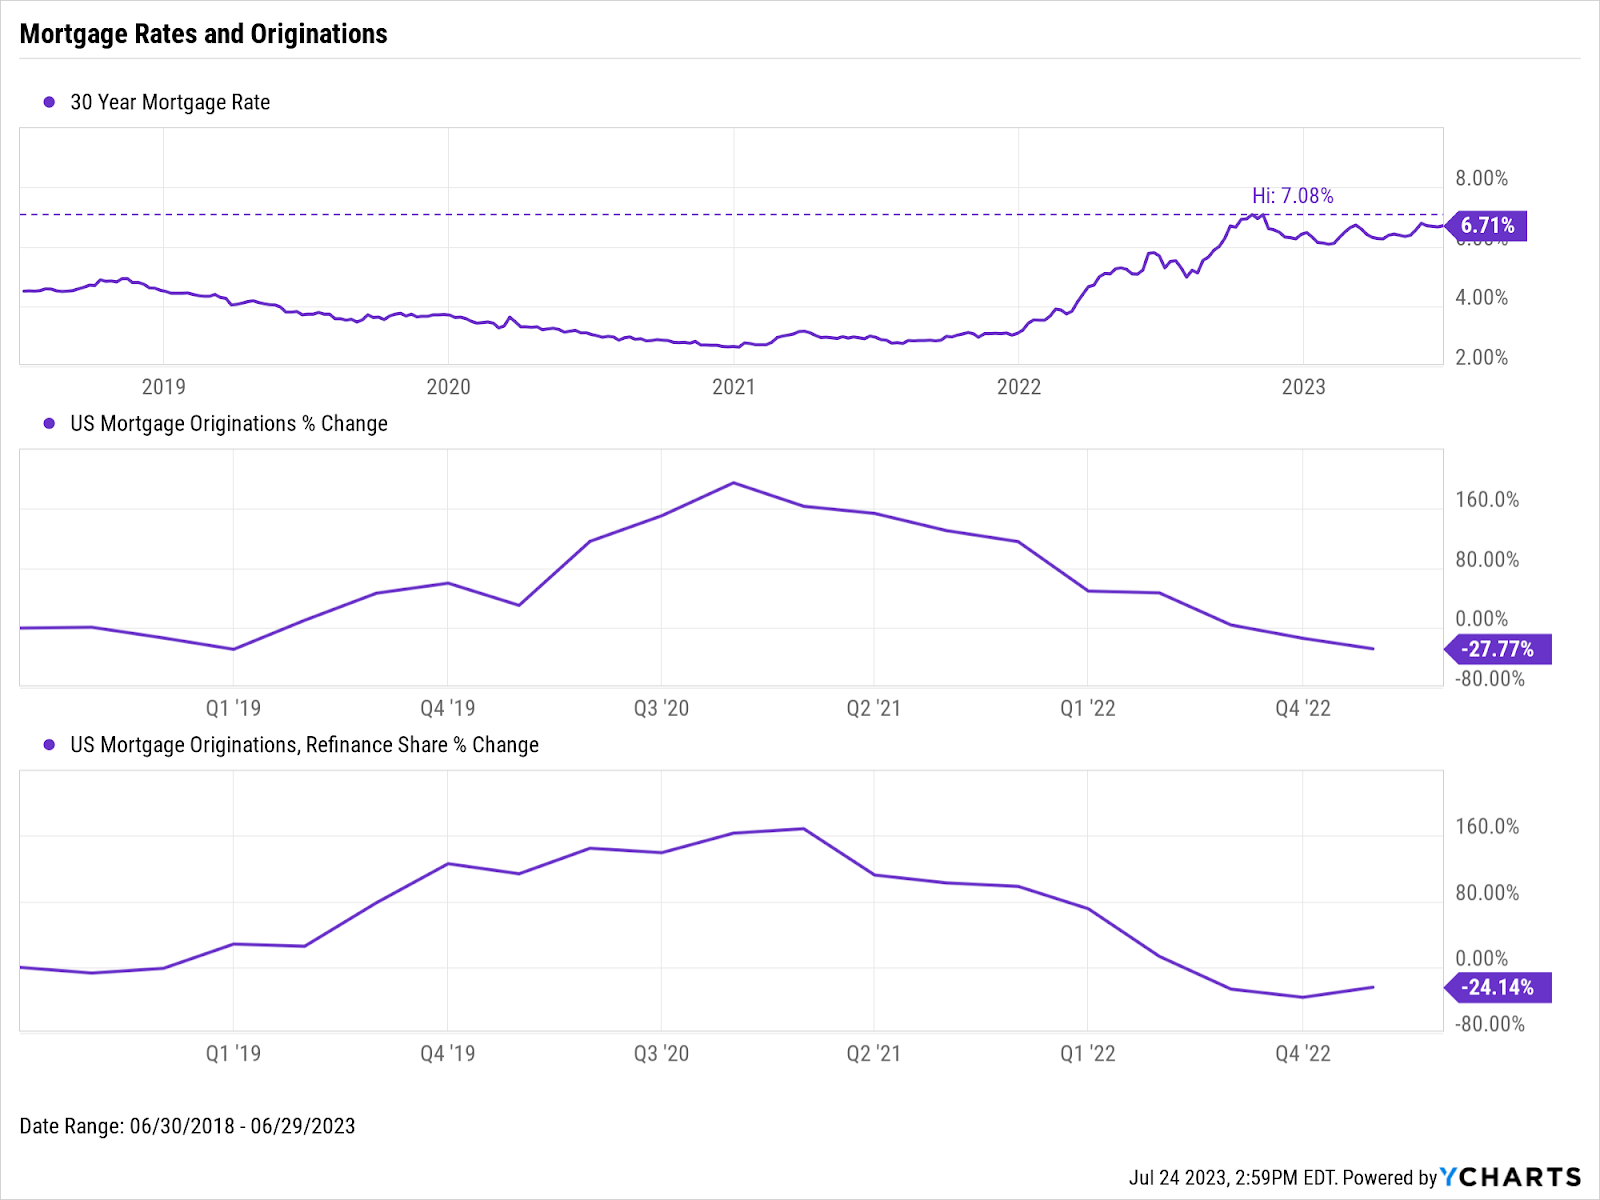 A chart showing the 30 year mortgage rate, mortgage originations, and mortgage refinance % change from 6/30/2018 to 6/29/2023 